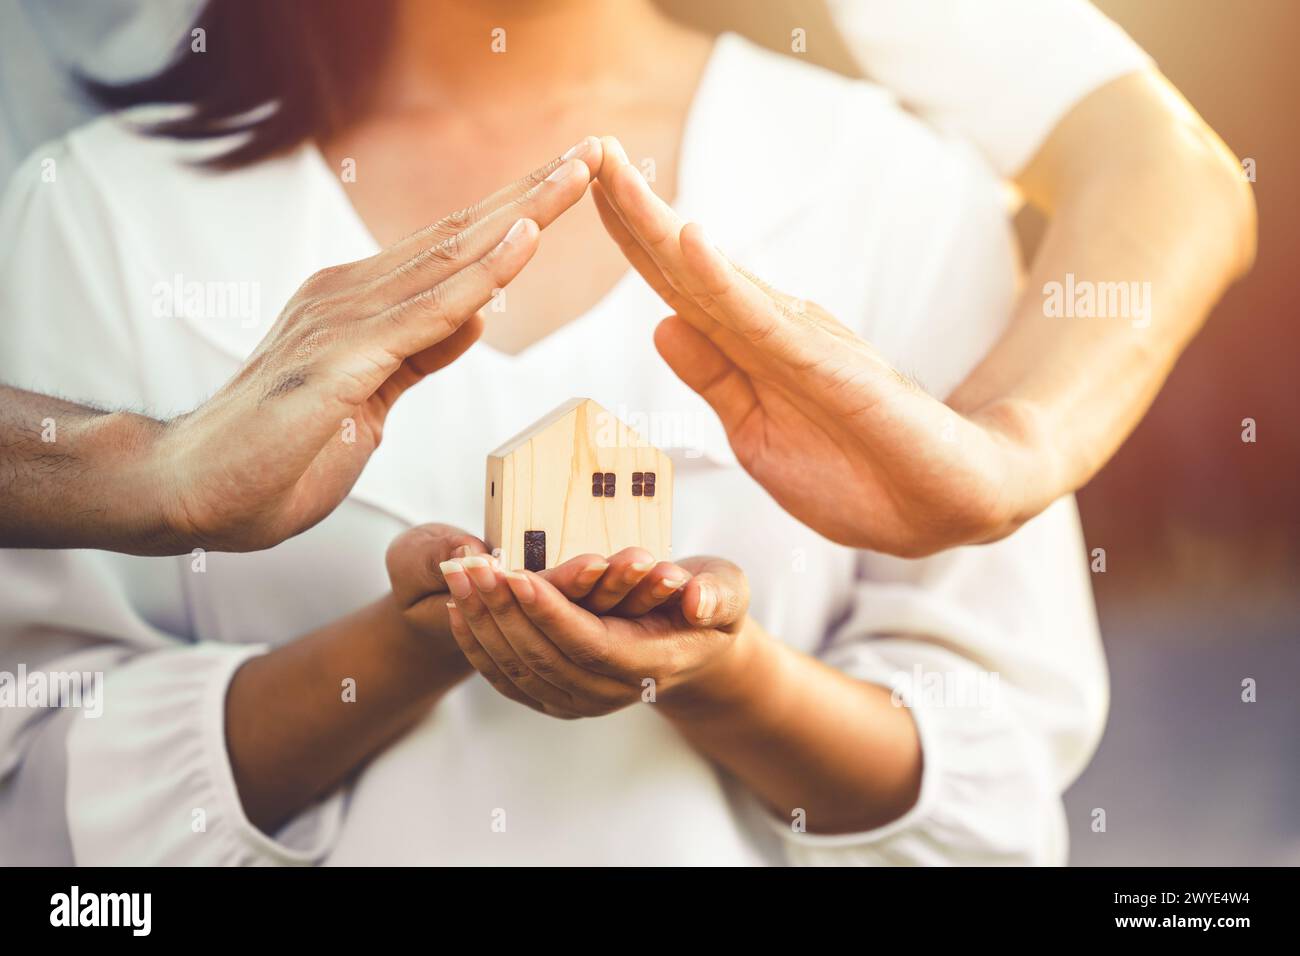 people hand holding miniature wooden house model for banking housing mortgage real estate rent lease home family concept Stock Photo